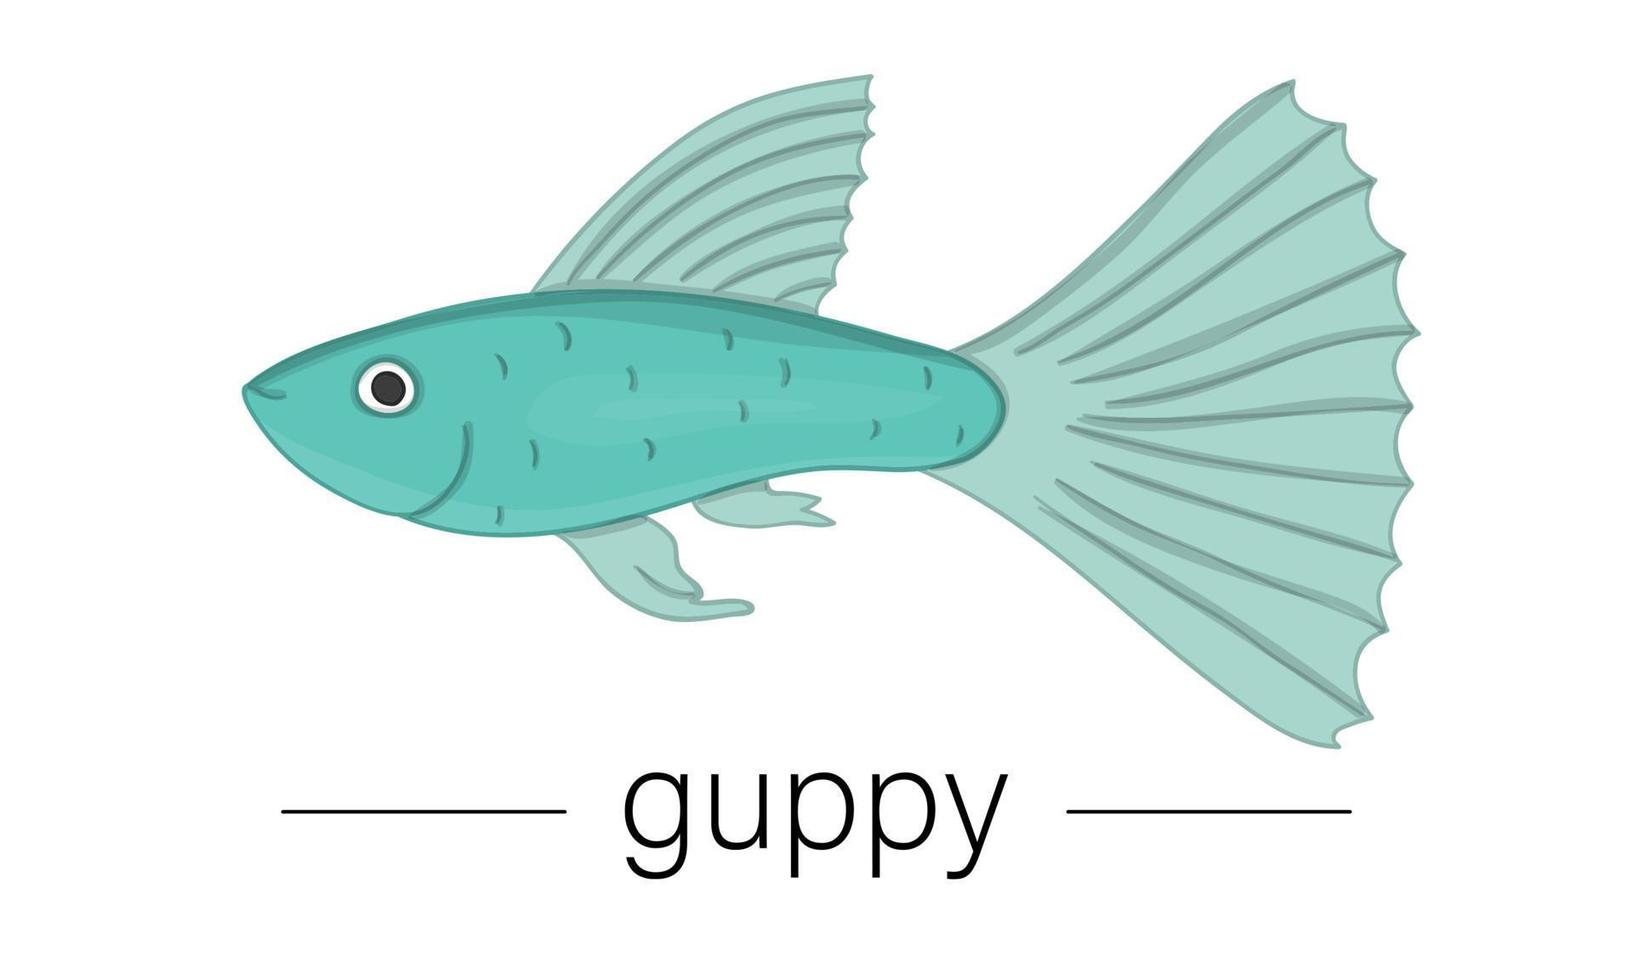 Vector colored illustration of aquarium fish. Cute picture of guppy for pet shops or children illustration